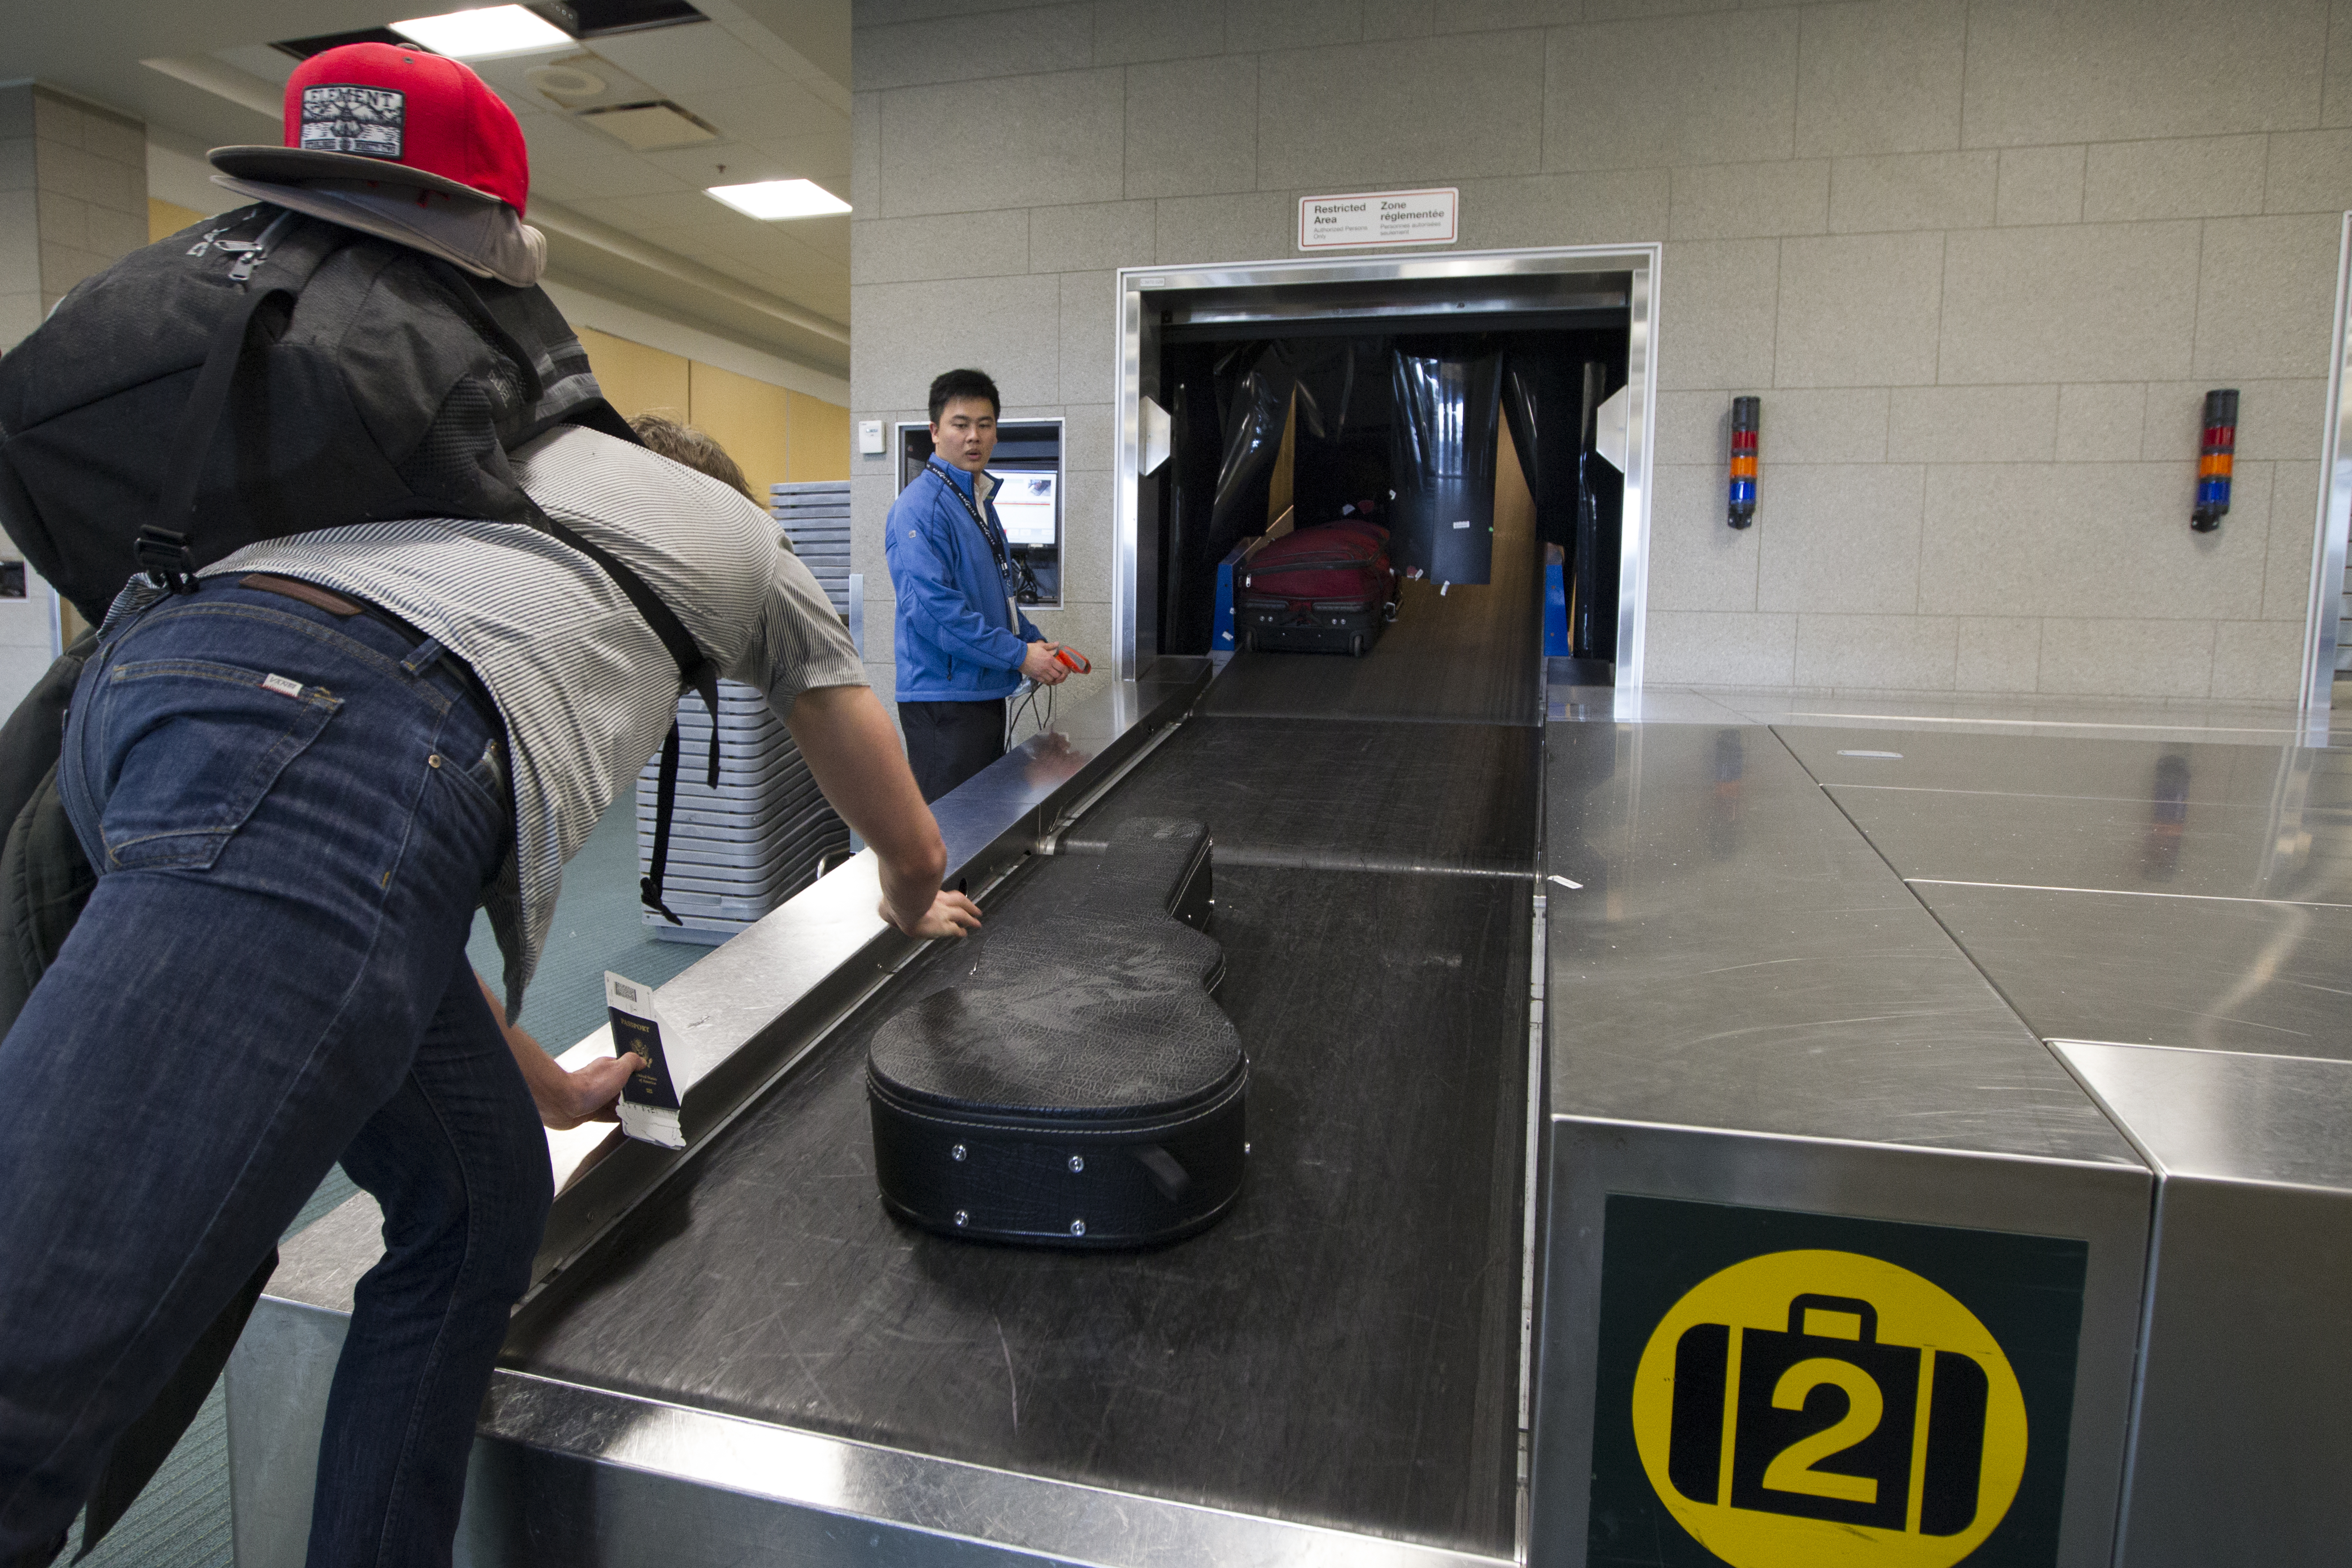 Preclearance travelers drop their checked luggage for secure baggage handling at Vancouver International Airport.Preclearance travelers drop their checked luggage for secure baggage handling at Vancouver International Airport.